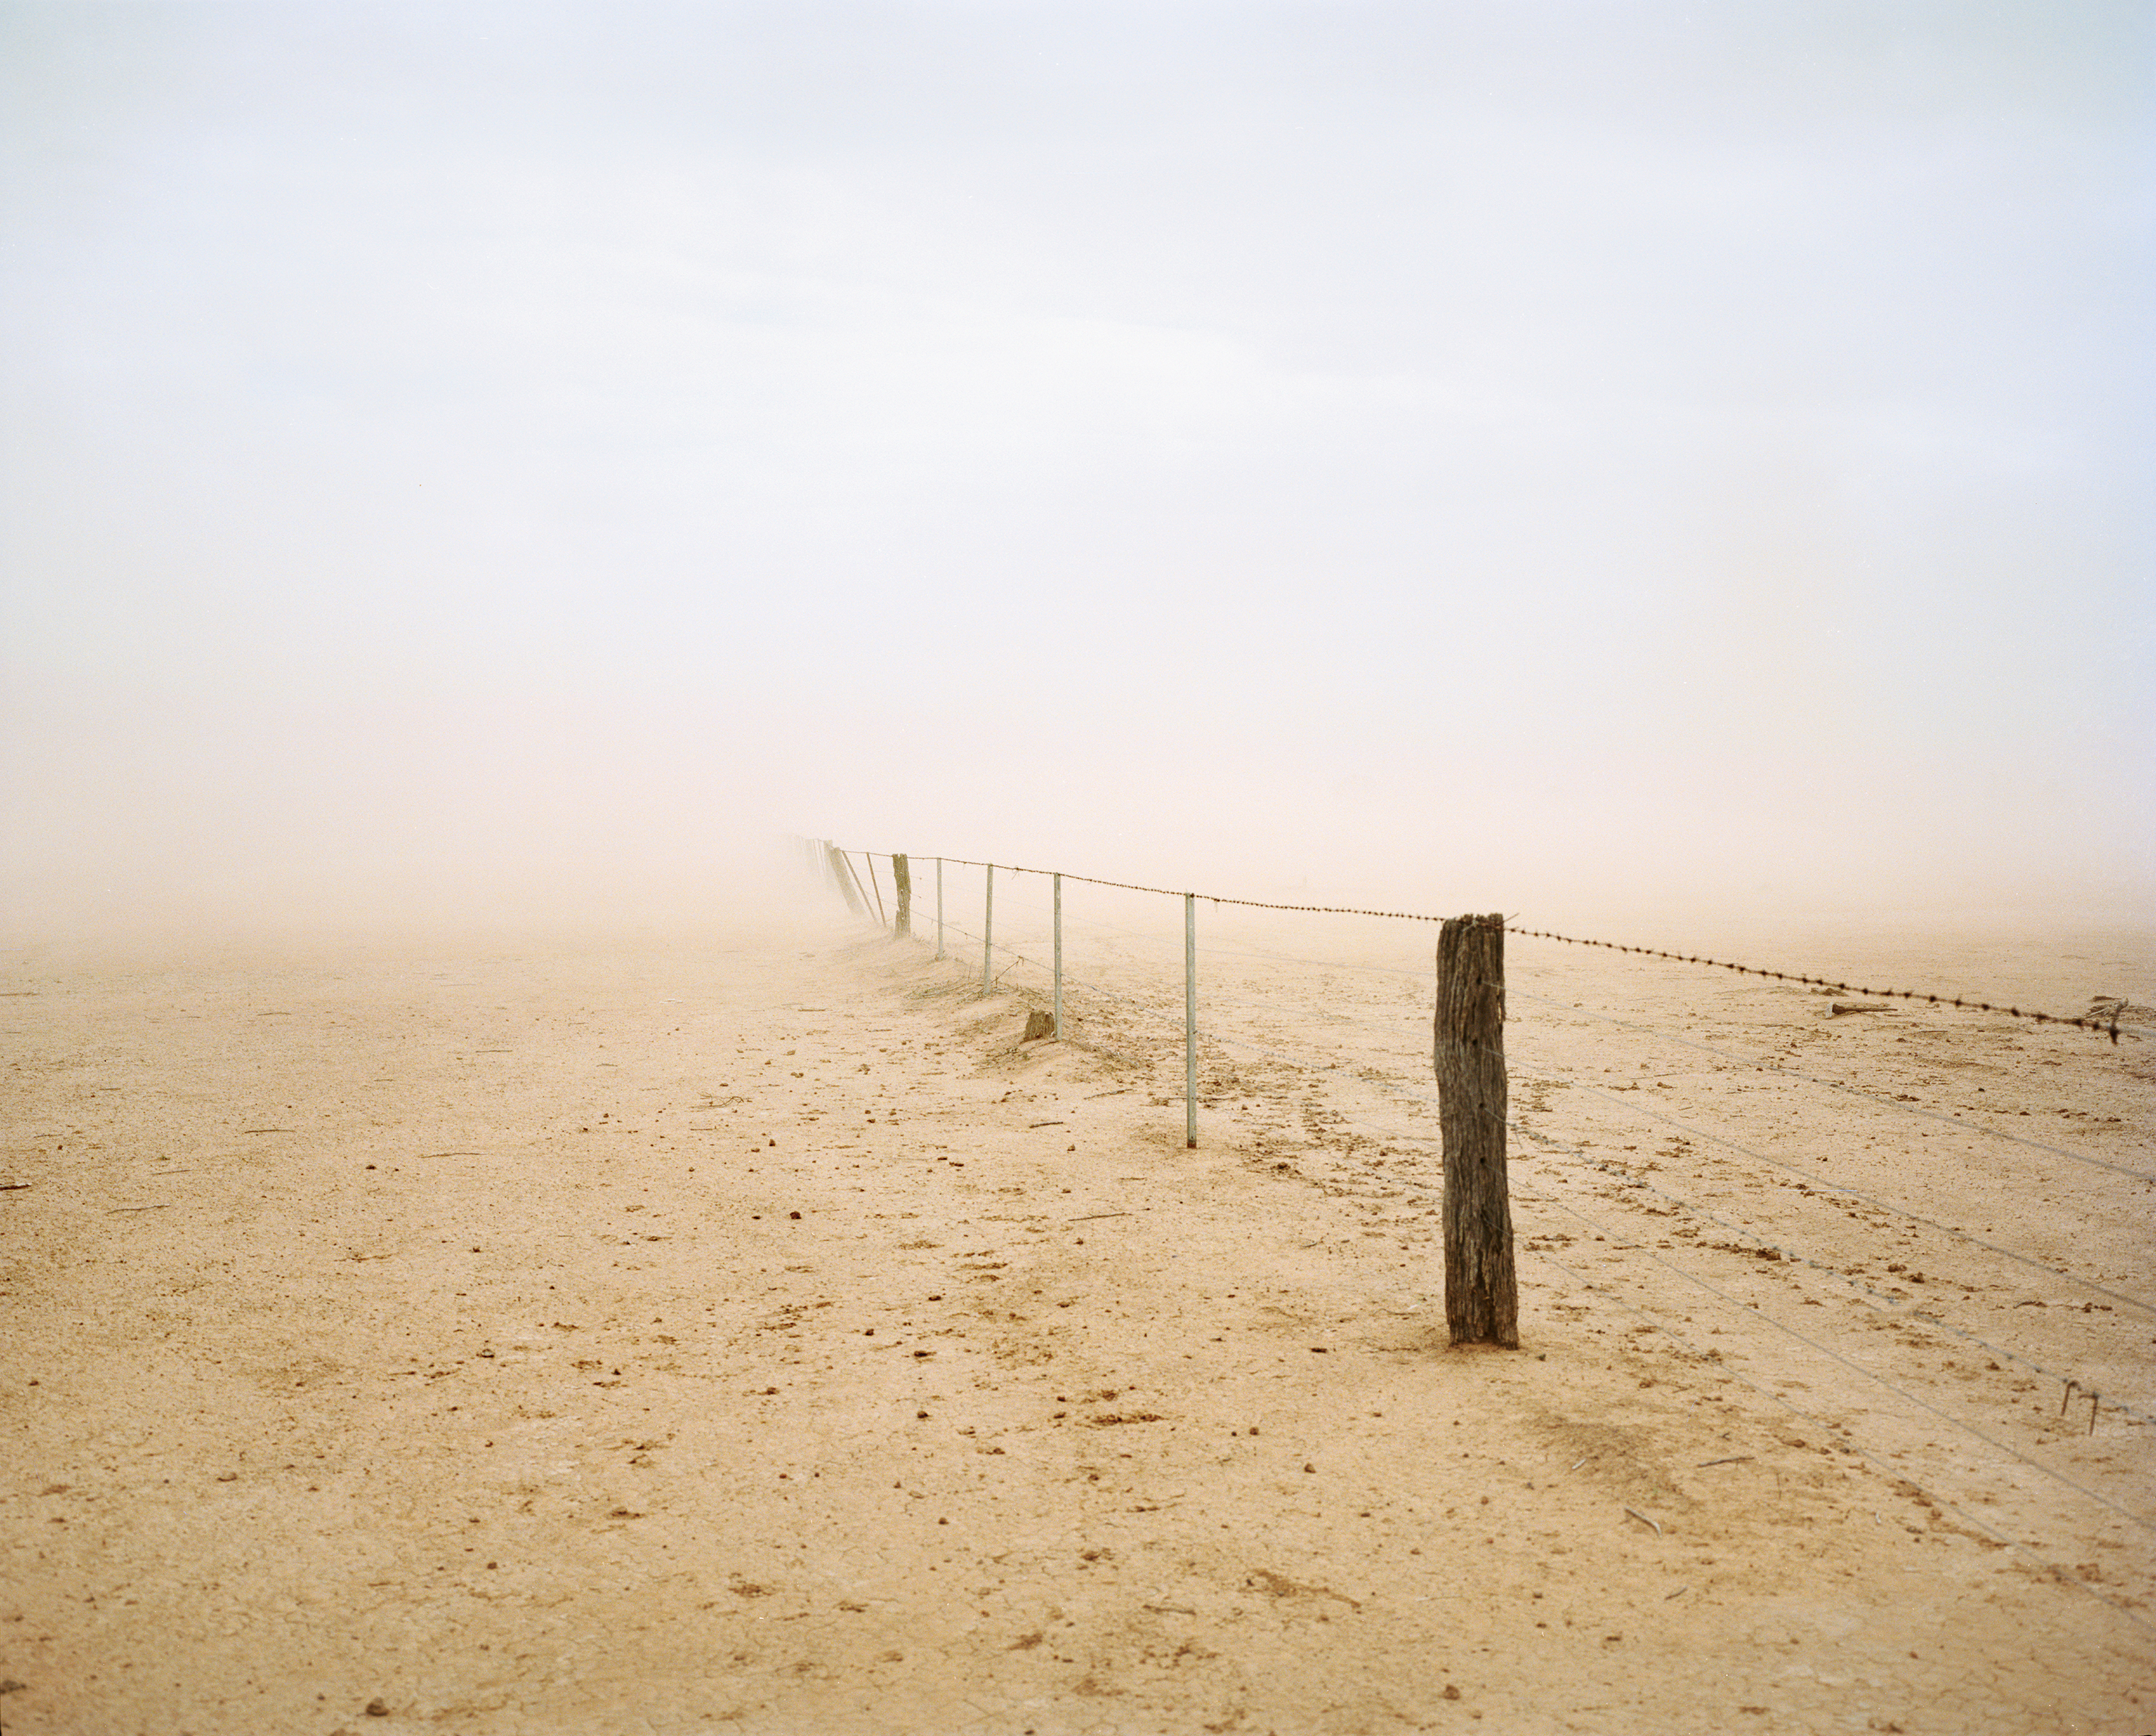 A dust storm blows across Epping Farm, the property of Jack and Jan Slack-Smith, near Pilliga in December. (Adam Ferguson for TIME)